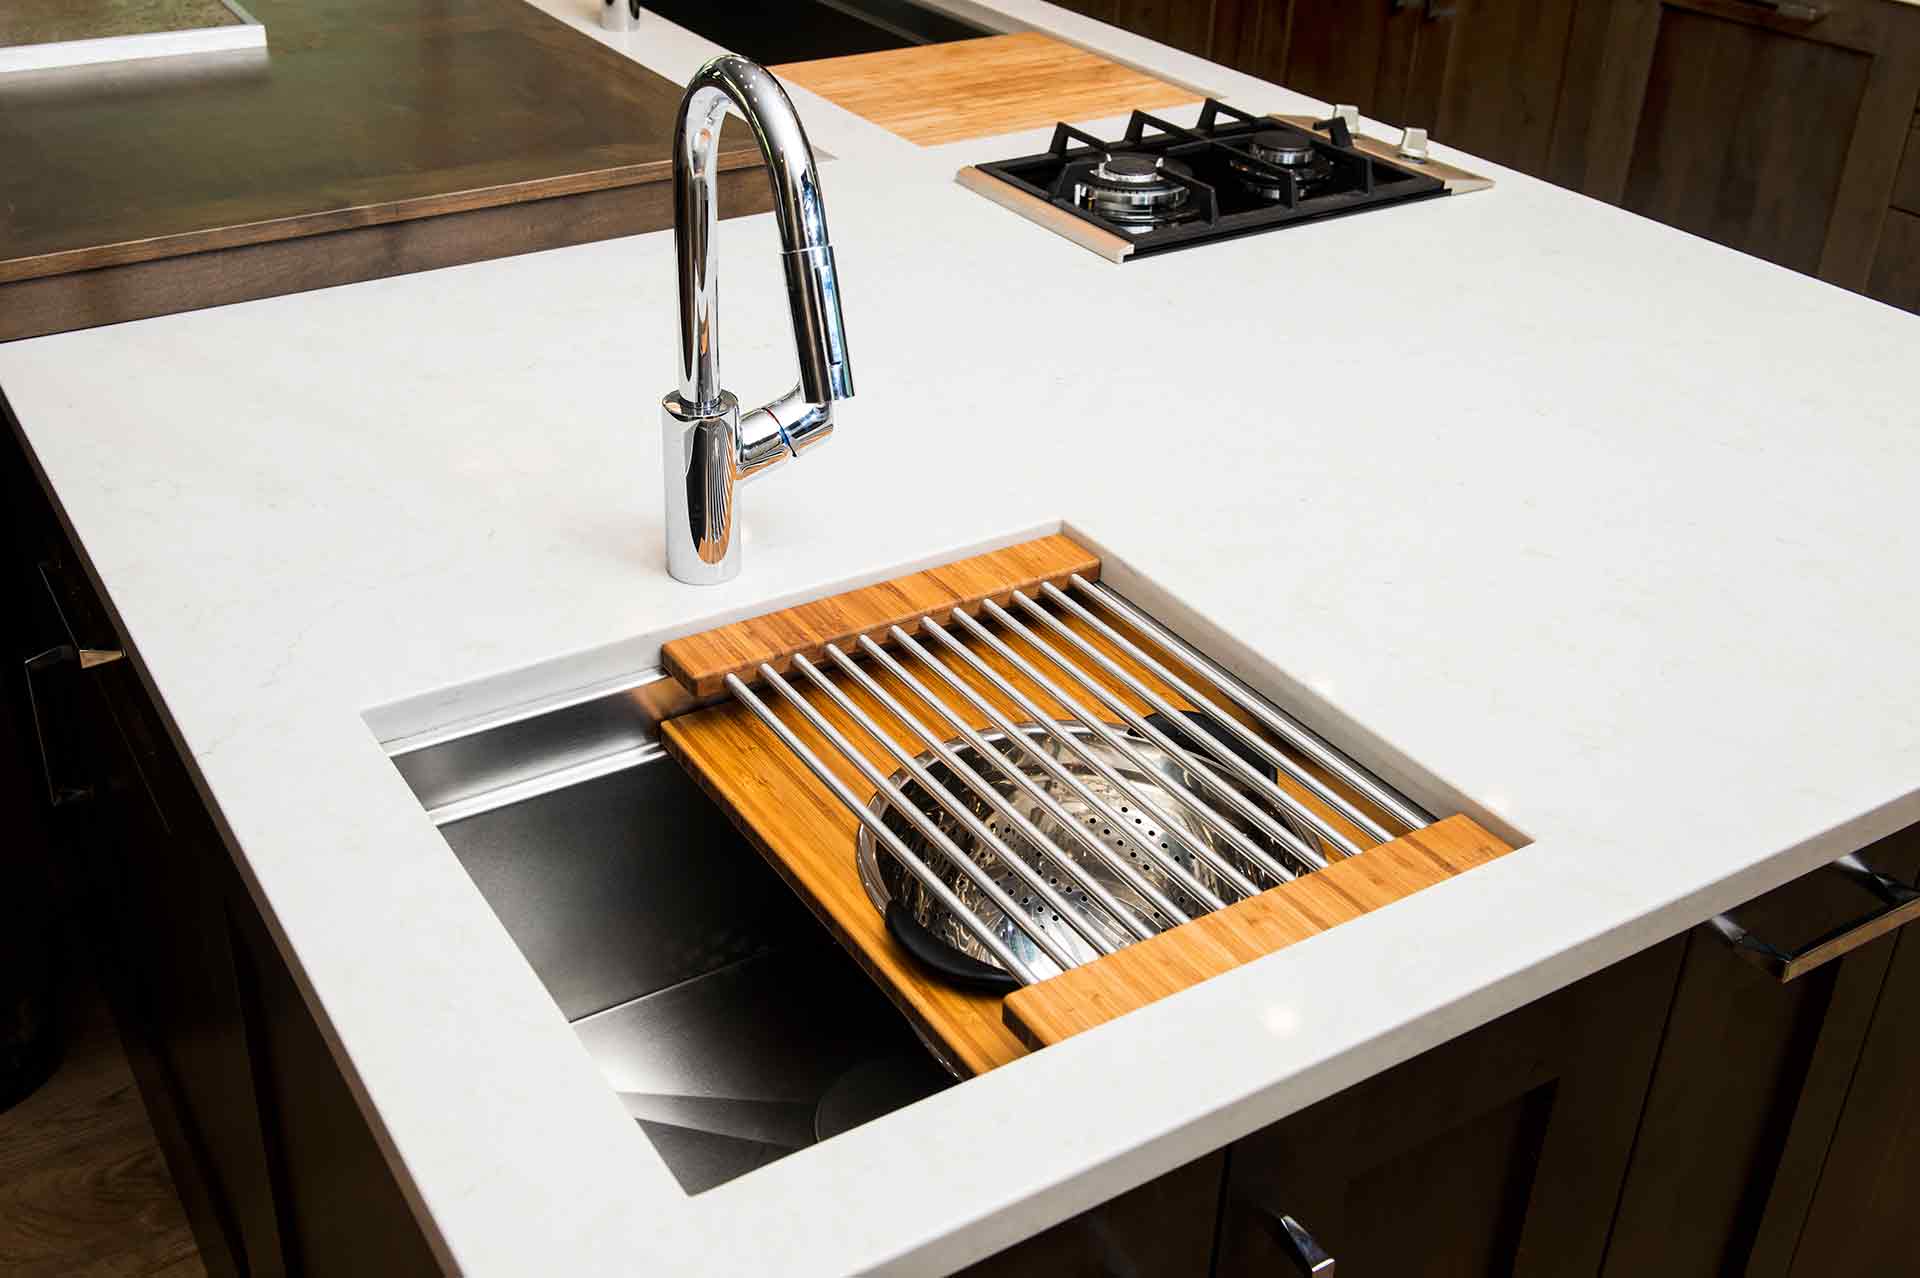 Iws 2 Stainless Steel Prep Kitchen Sink Natural Bamboo